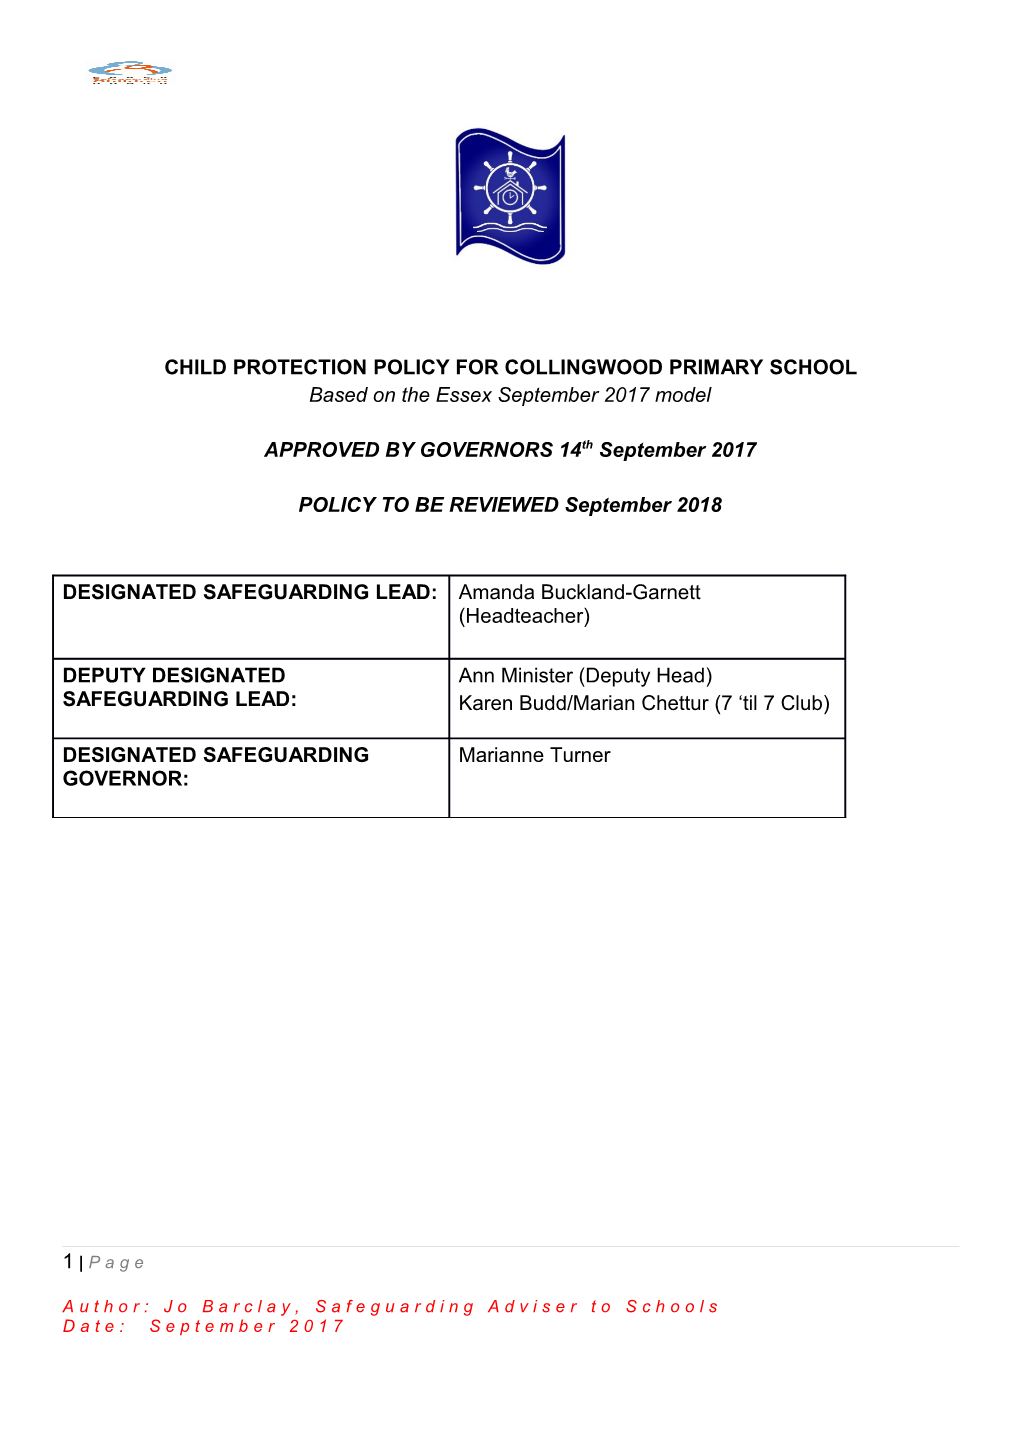 Child Protectionpolicy for Collingwood Primary School